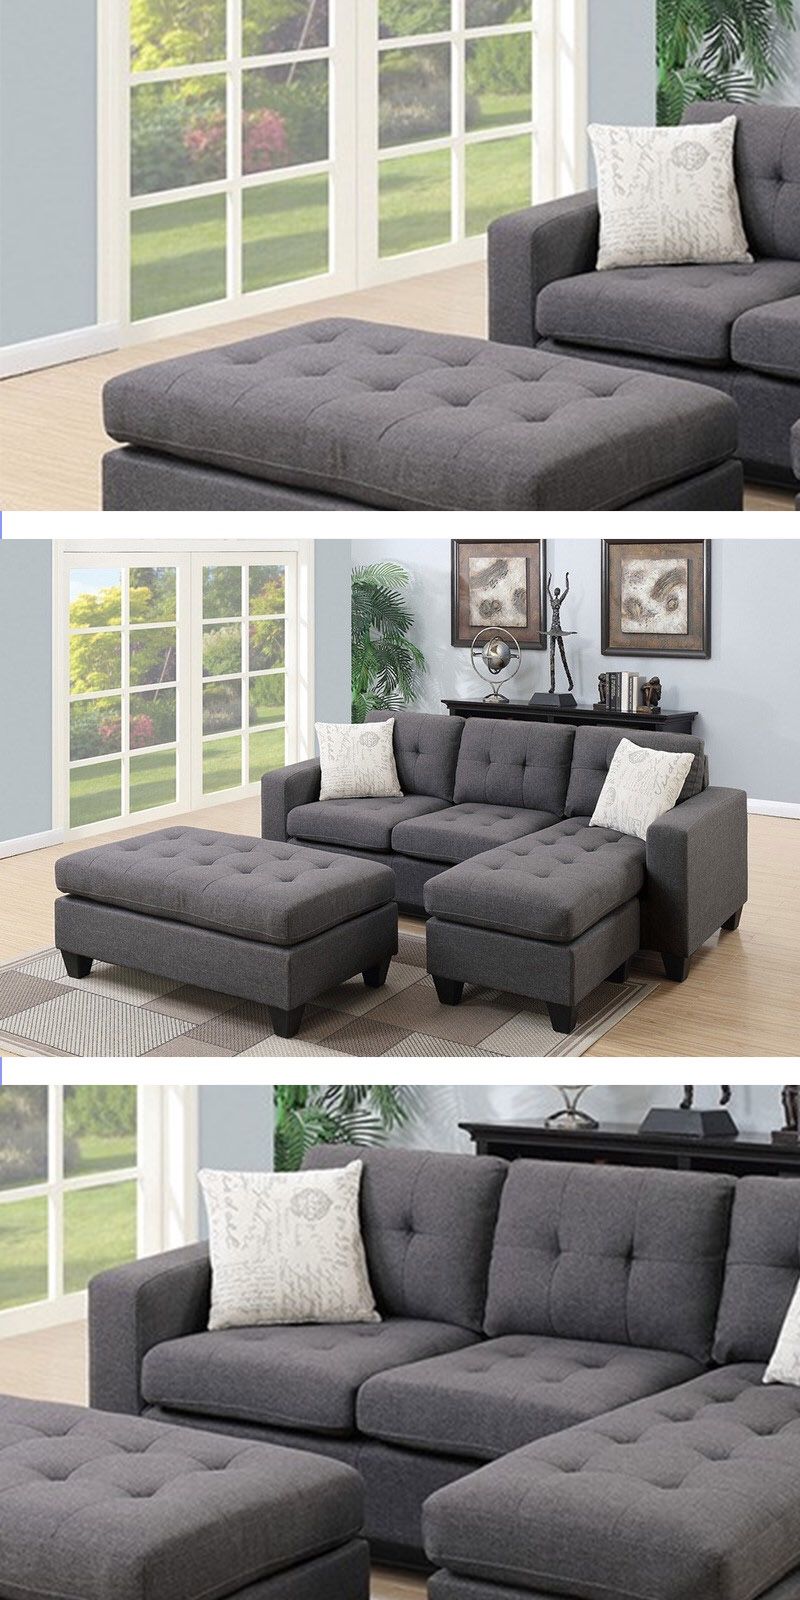 SECTIONAL & OTTOMAN | LIVING ROOM | COUCH | LOVESEAT | SOFA | JUEGO DE SALA | DELIVERY FREE BY TMF 🚚📦🛠